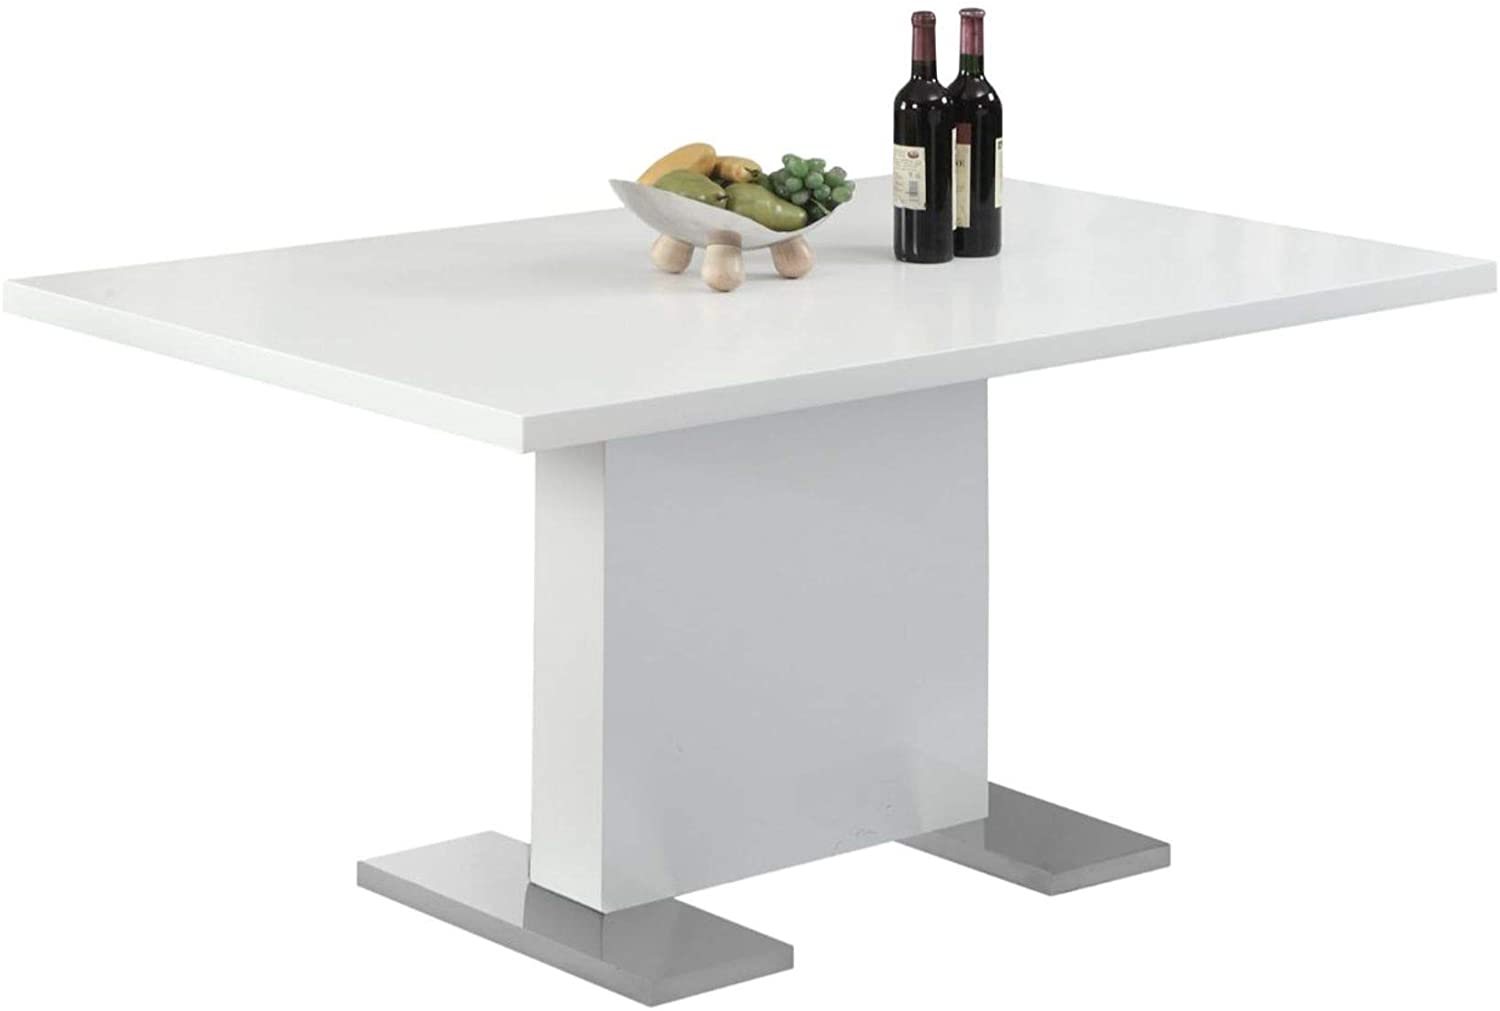 B0894WQWY8 Offex 35" x 60" High Glossy White Dining Table with Chrome-Look Feet